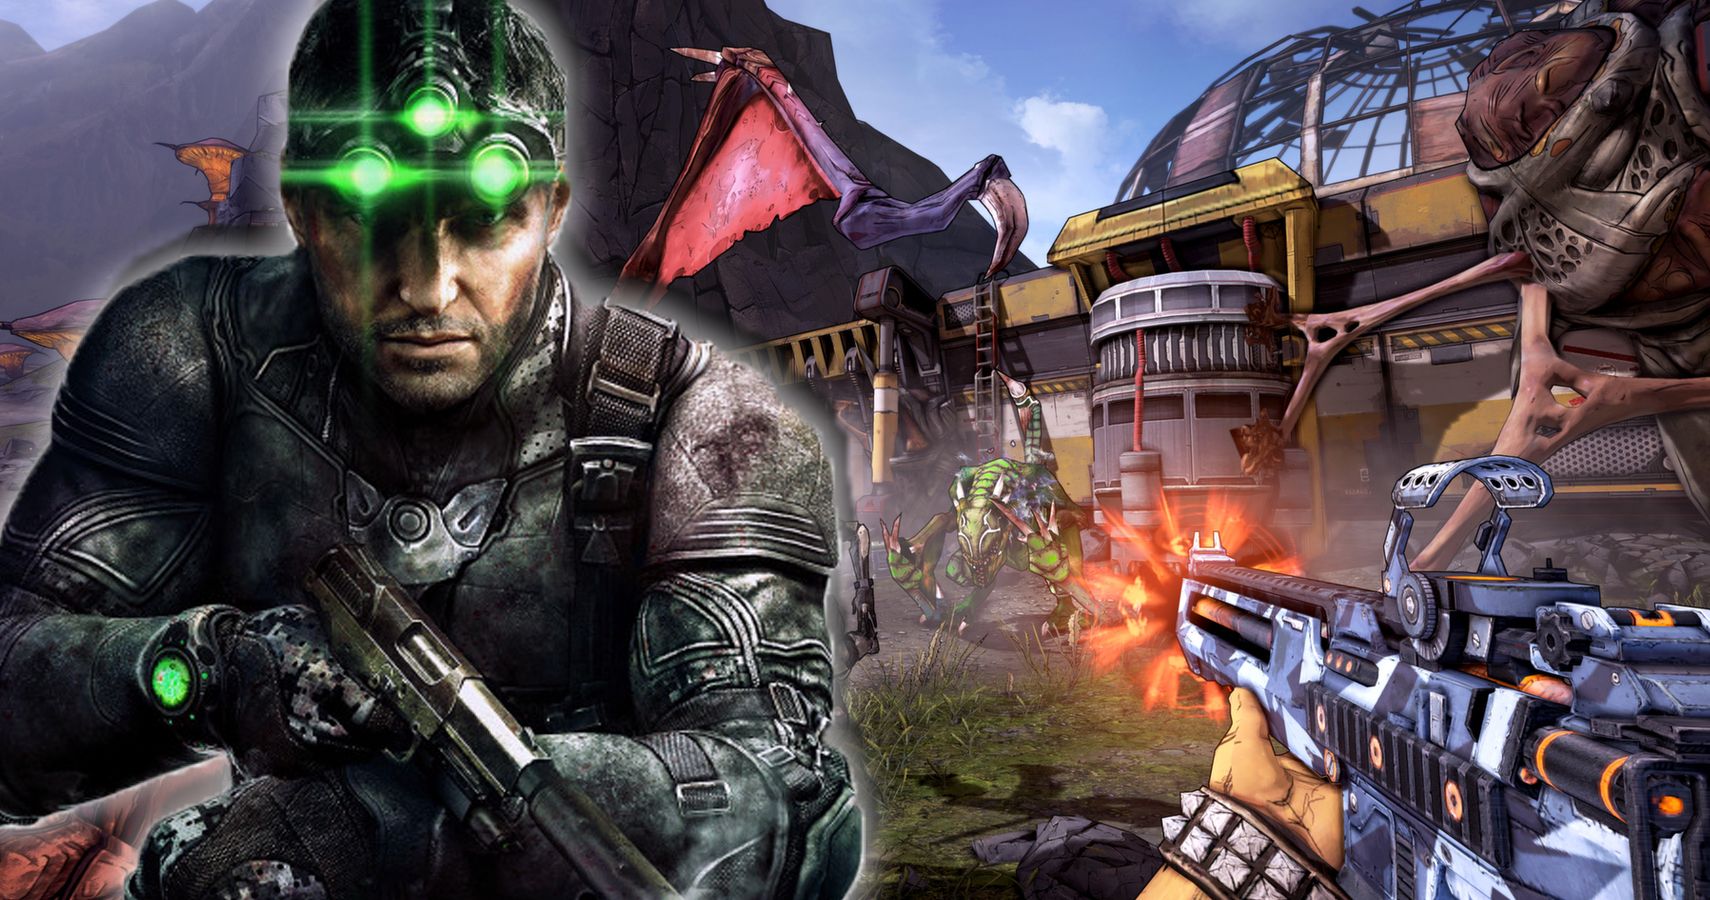 New Splinter Cell sequel in development at Ubisoft, says report - Polygon